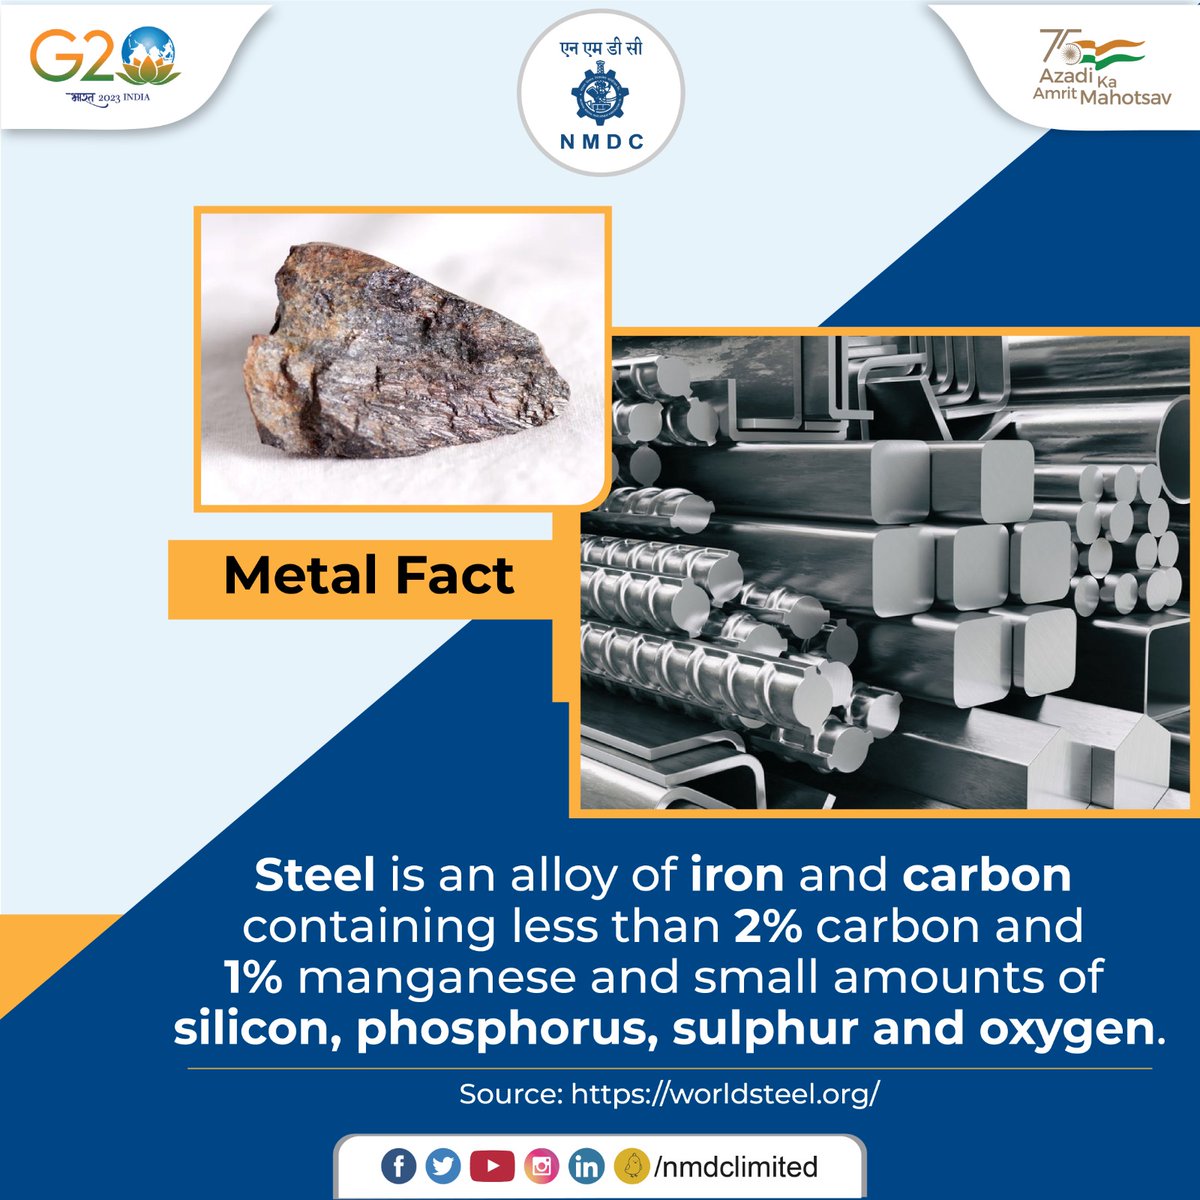 Its availability, strength, versatility, ductility, and recyclability makes Steel the future of infrastructure. NMDC is committed to meet the growing demand of Steel. 

#MetalFact #SteelFact
#IspatiIrada